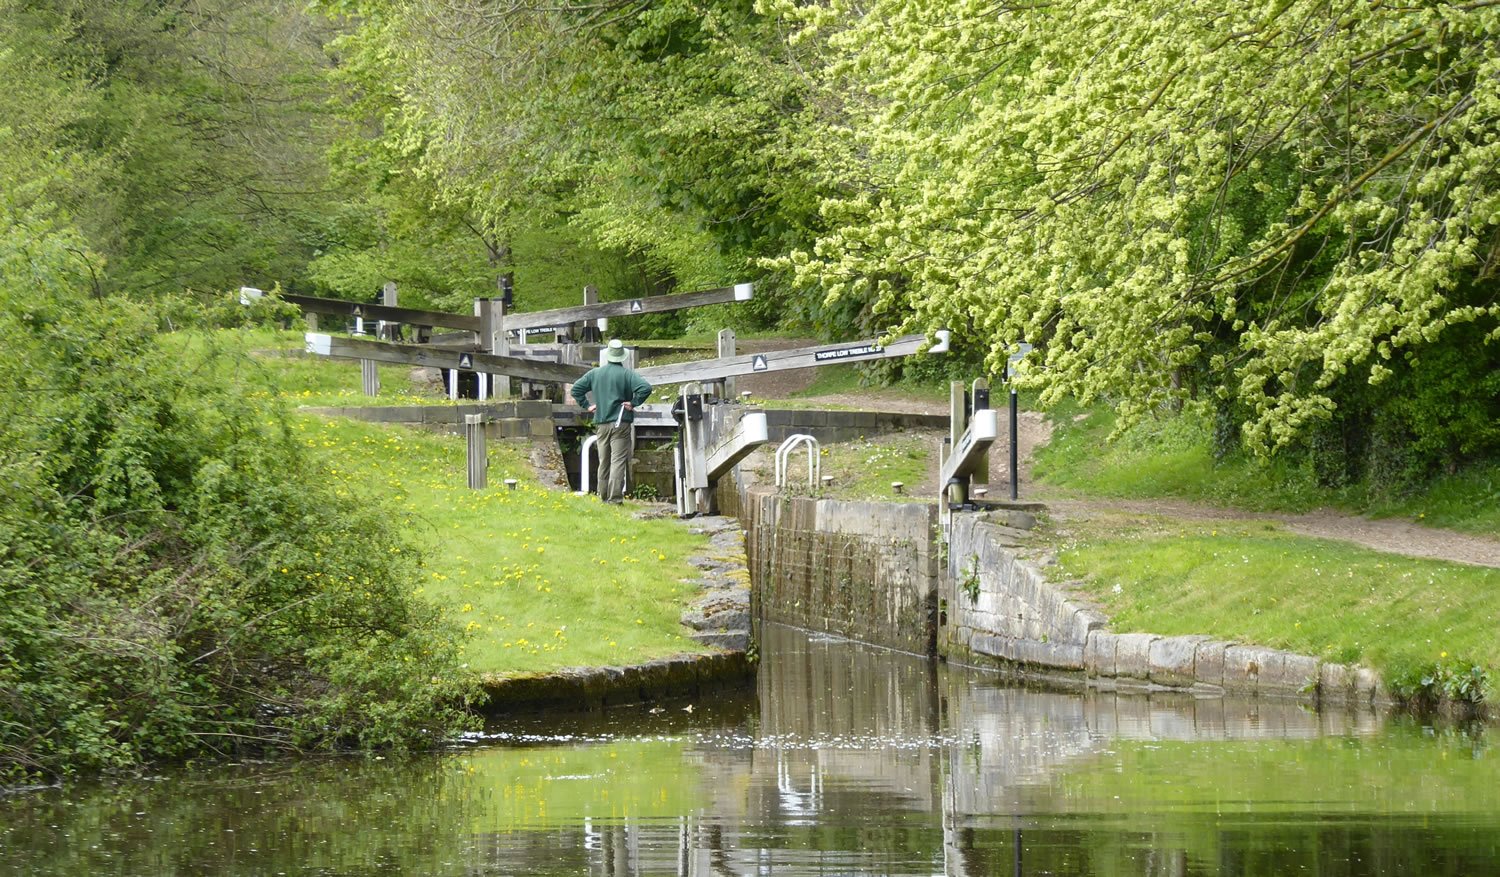 Image name giants staircase locks chesterfield canal south yorkshire the 11 image from the post Walk: The Giant's Staircase in Yorkshire.com.